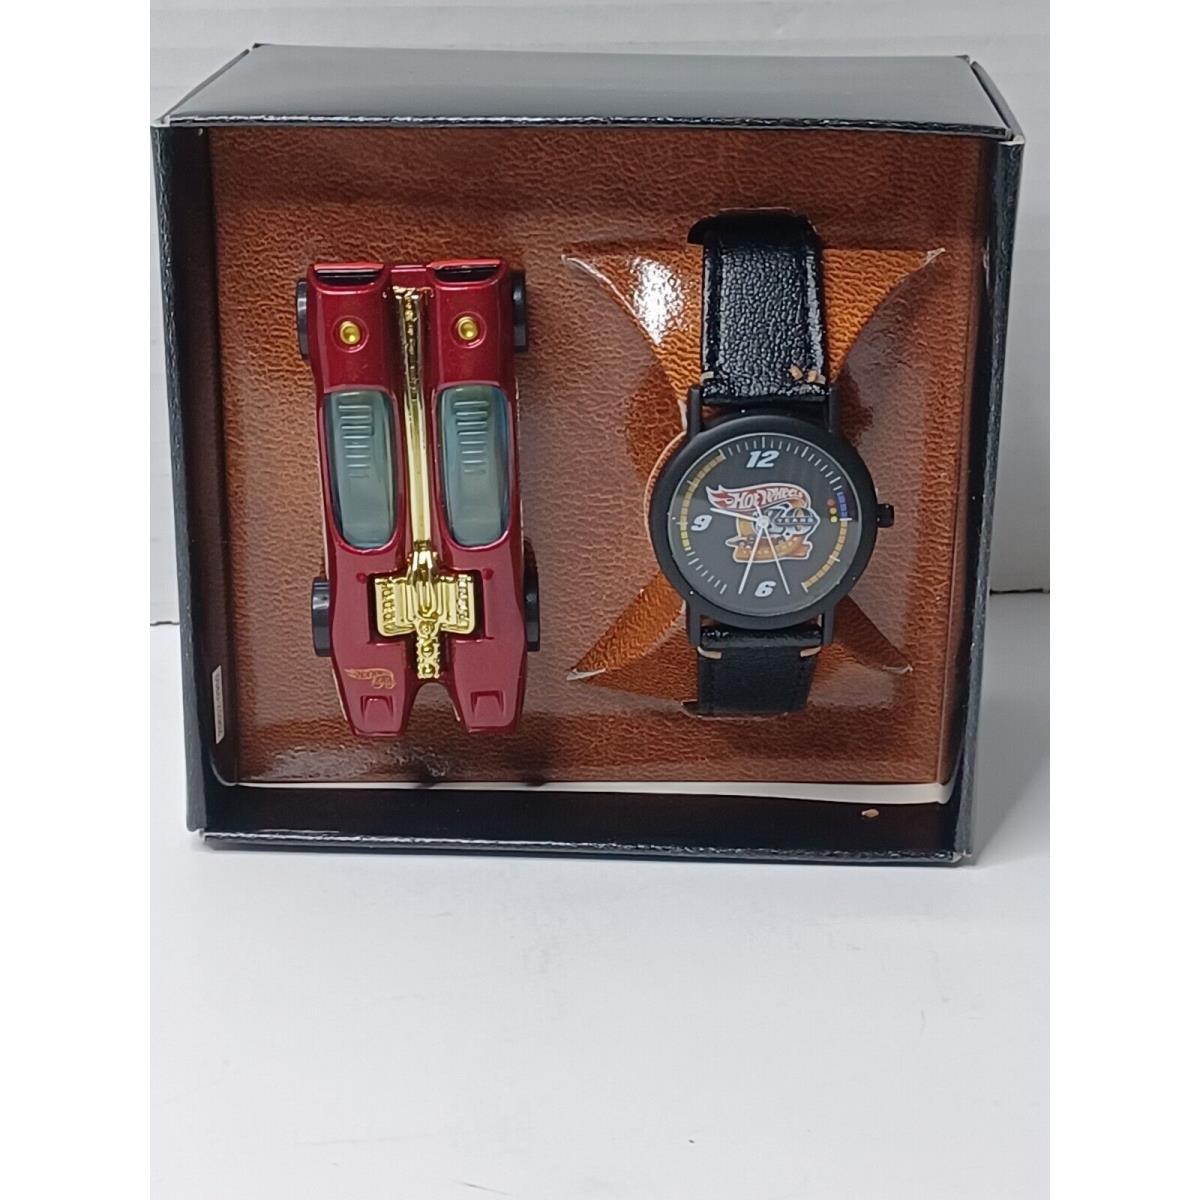 1998 Vintage Hot Wheels Watch and Car Limited Splittin Image Collector Watch Set